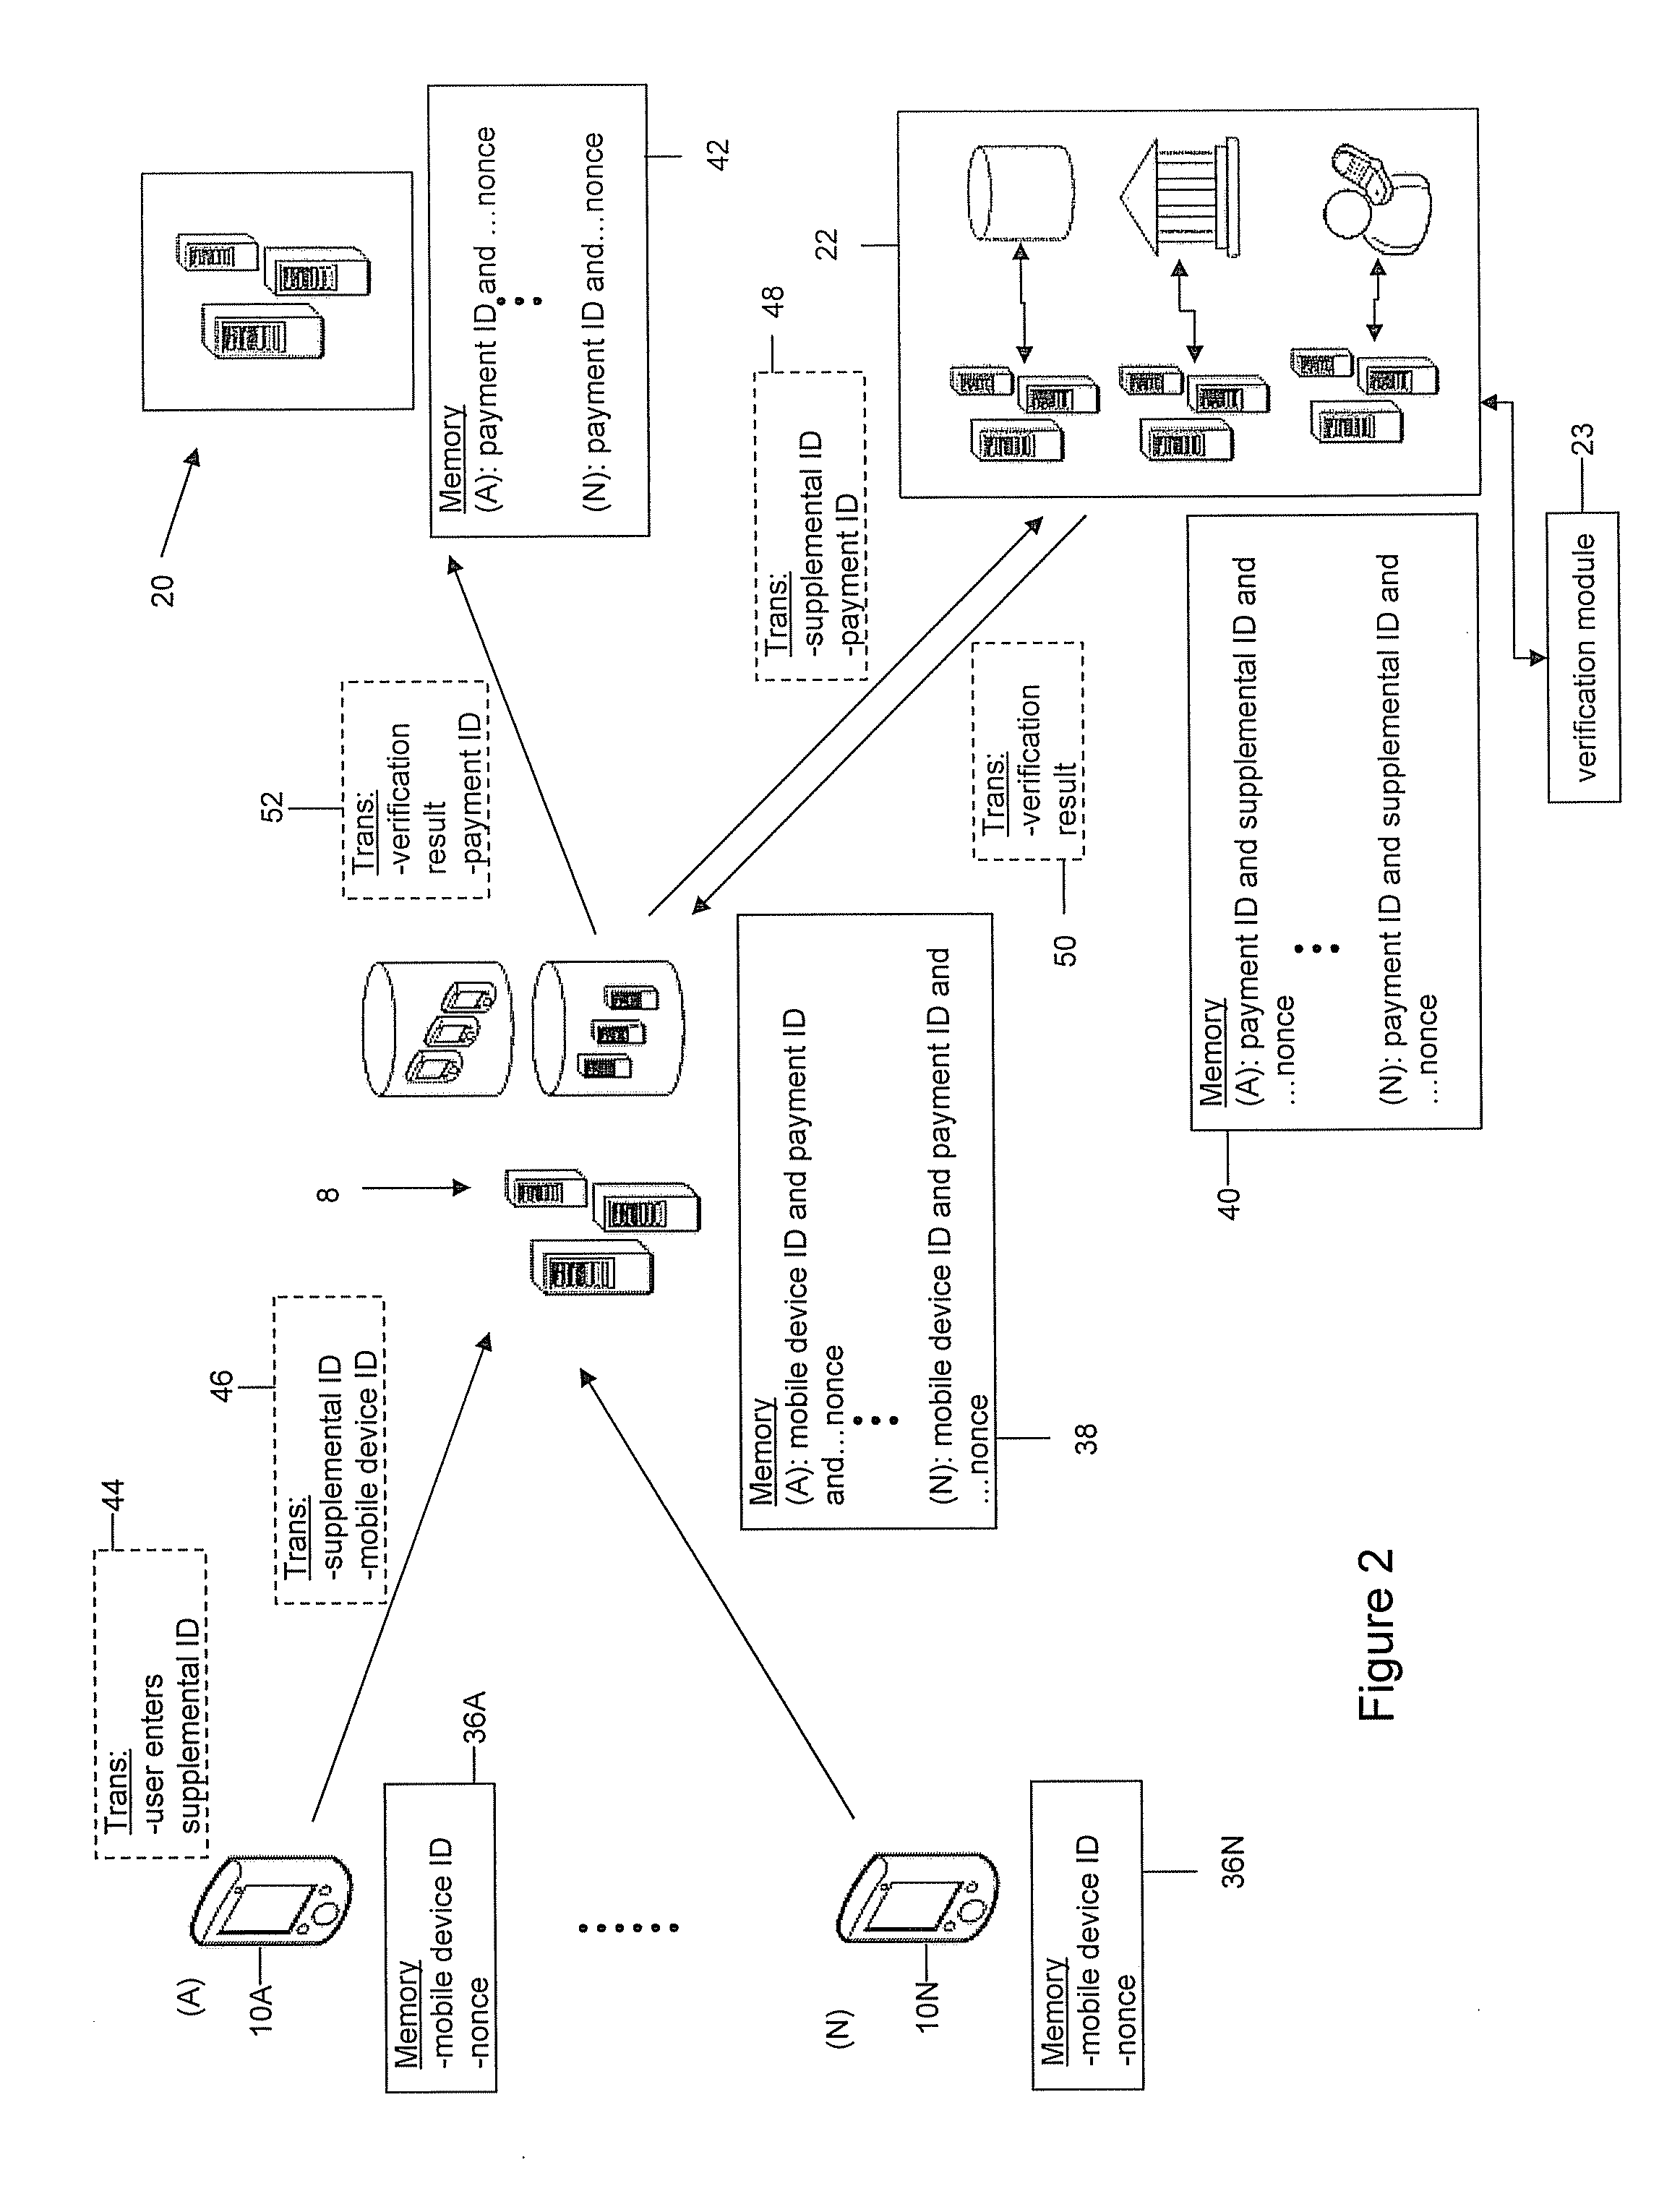 System and method for secured communications between a mobile device and a server